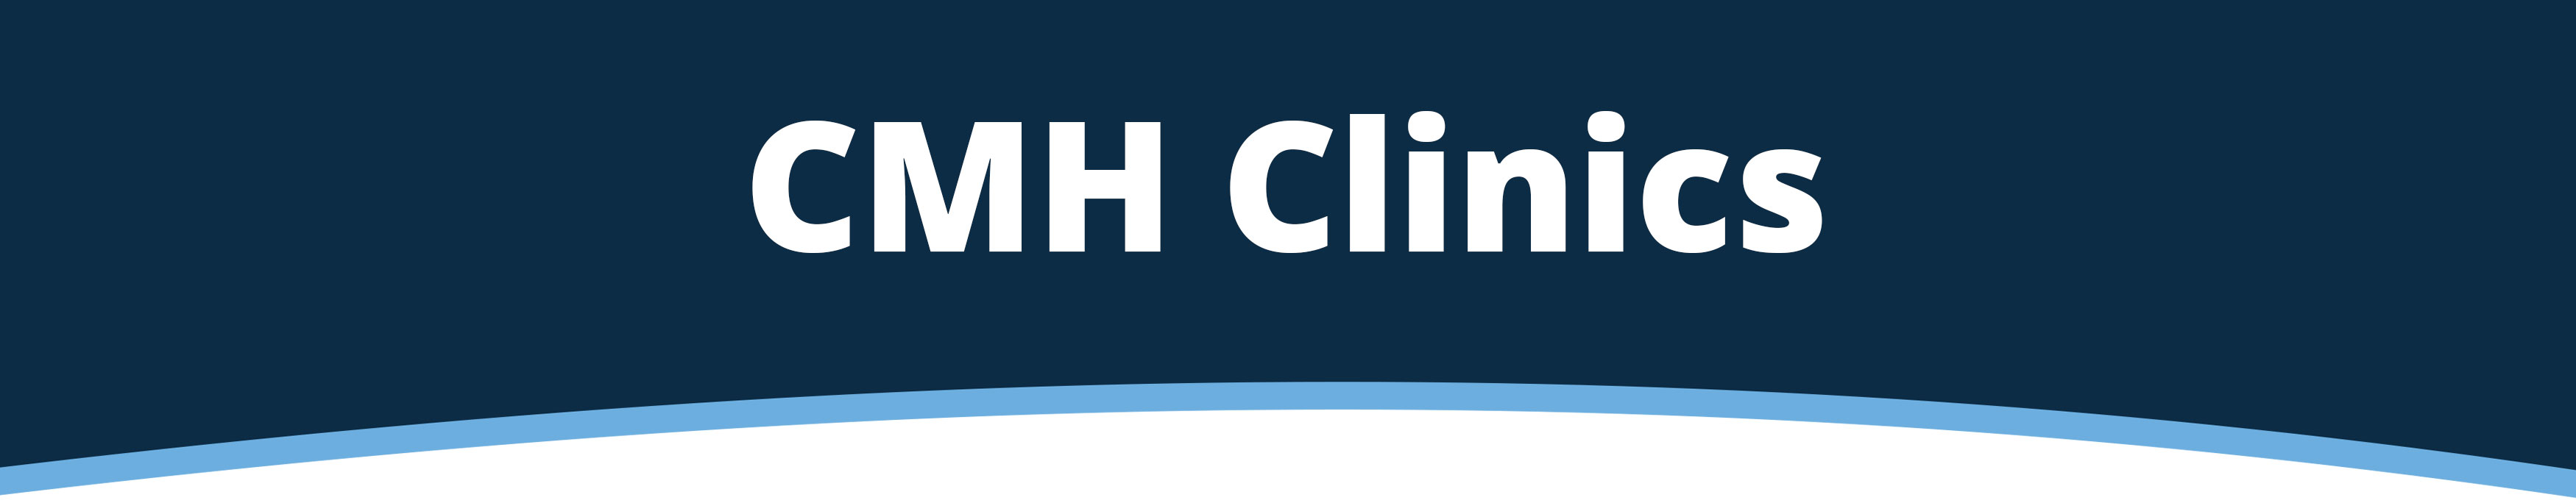 Banner that says: CMH Clinic